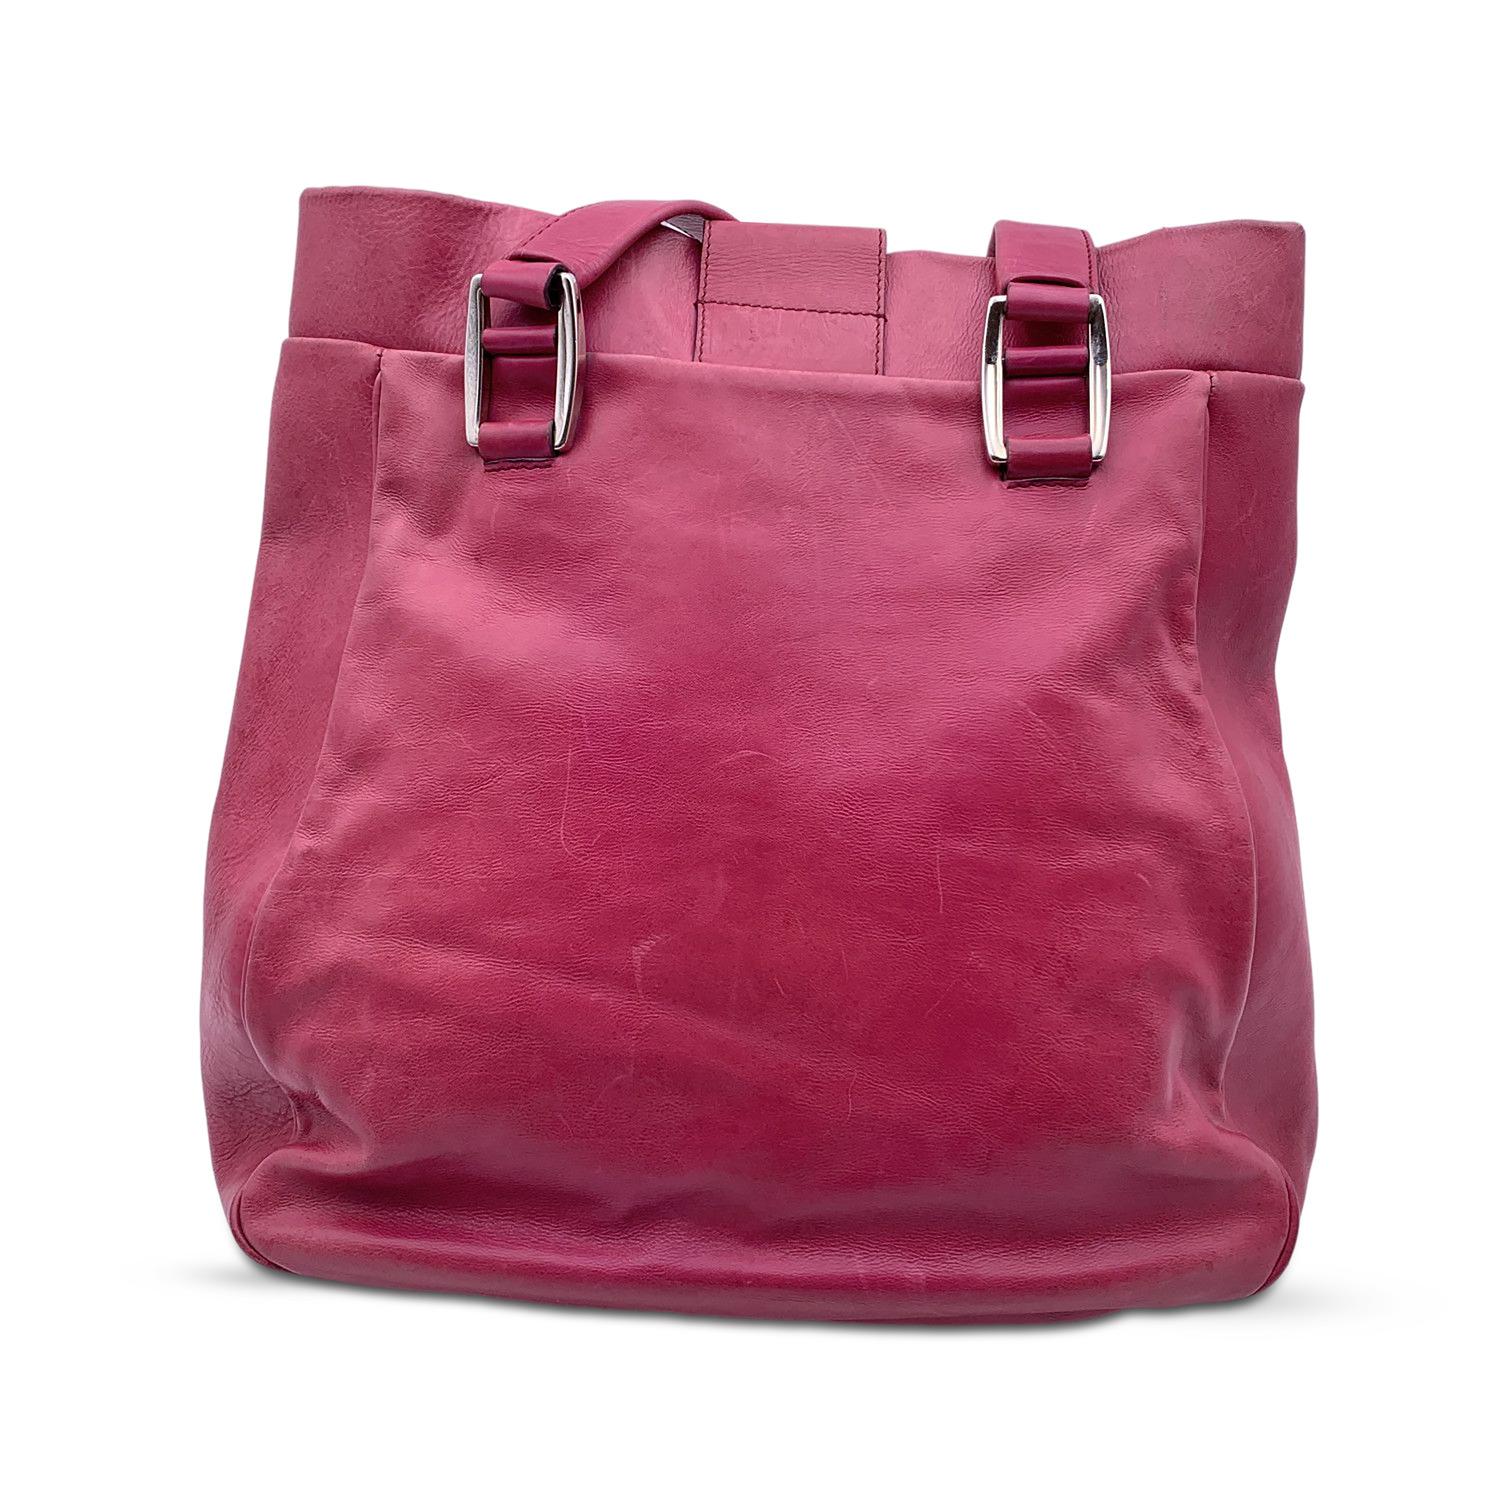 Celine Pink Purple Leather Tote Shoulder Bag with Spheres In Good Condition For Sale In Rome, Rome